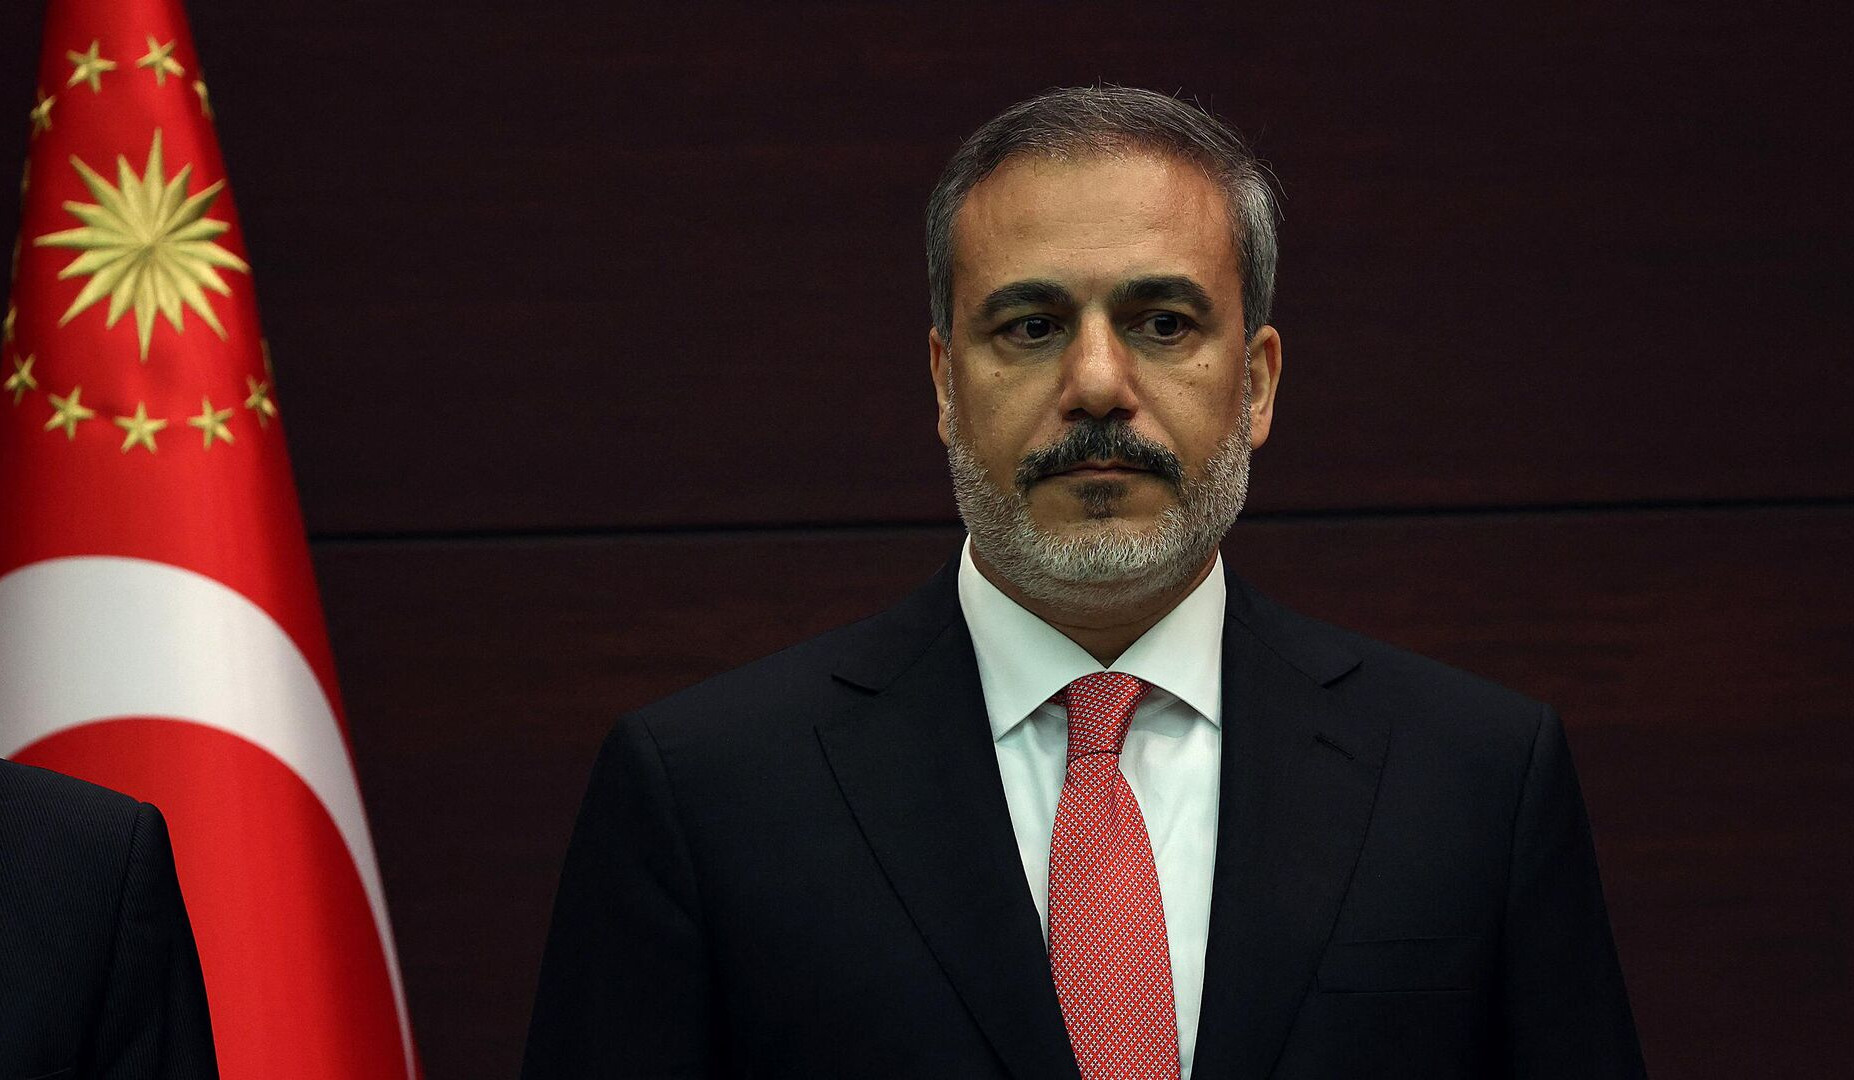 Turkey’s New Foreign Minister to Pursue Thaw With Arab World, Bloomberg